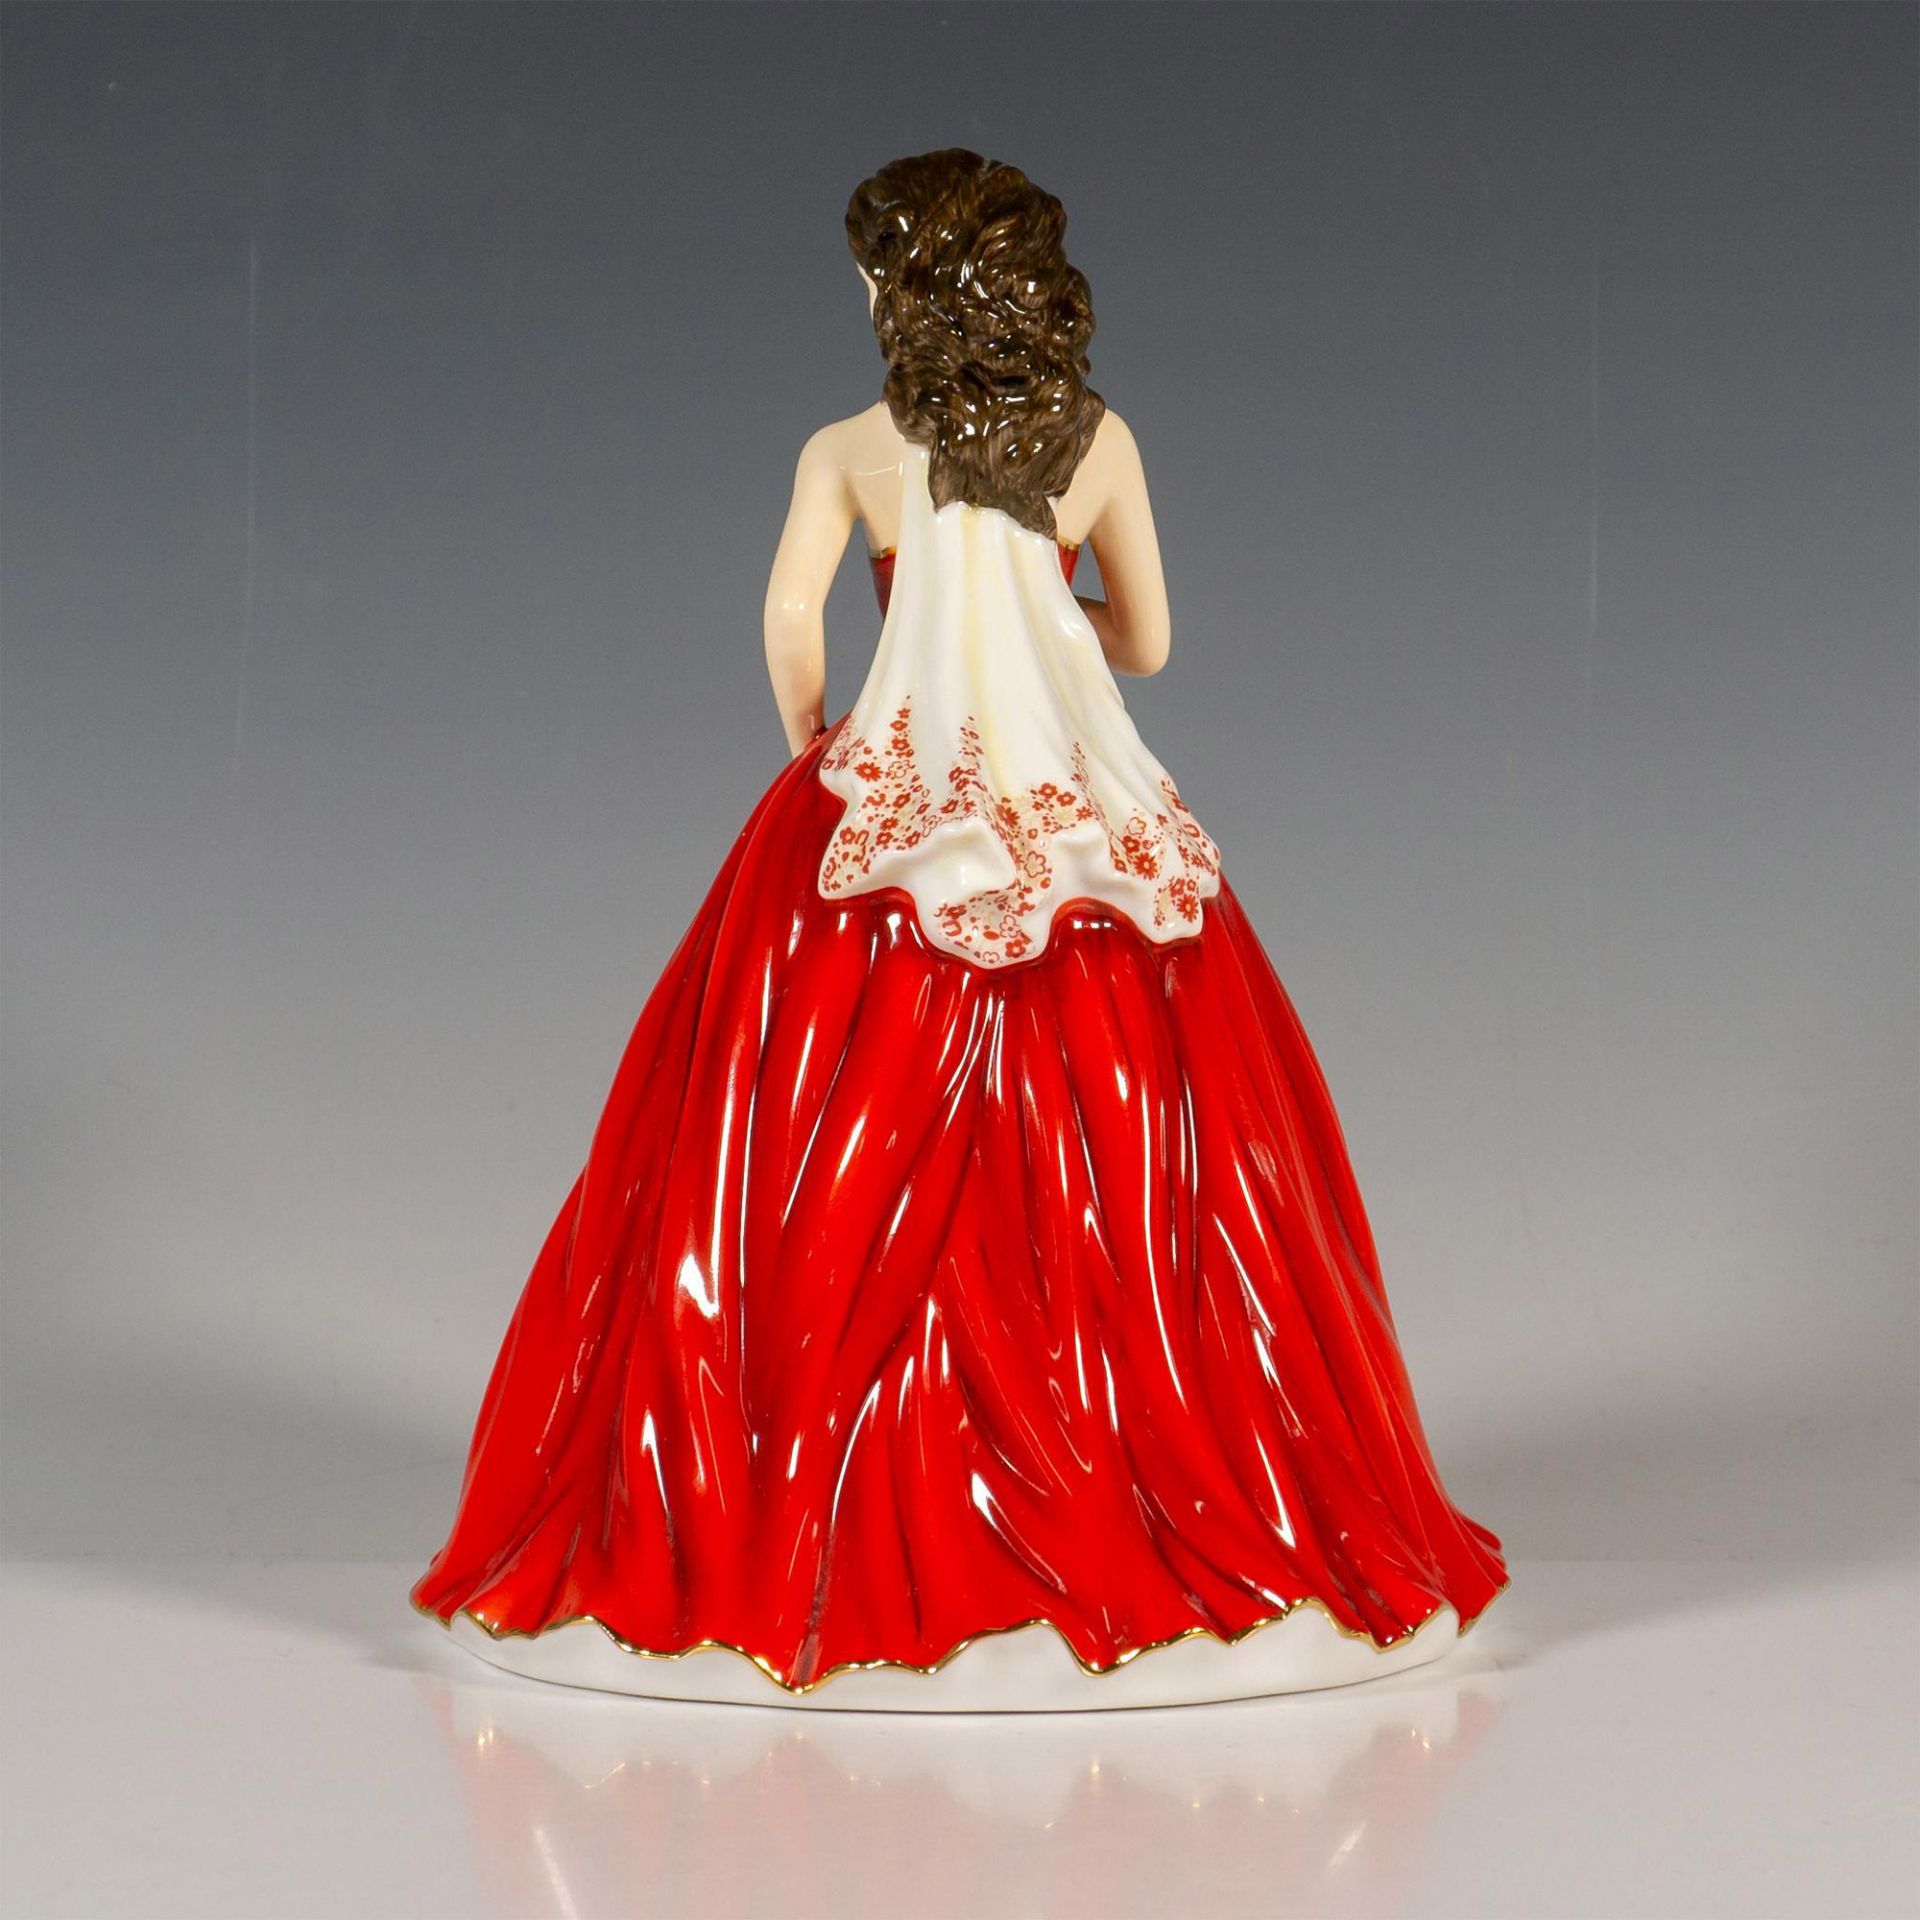 Ruby - HN5760 - Royal Doulton Figurine - Image 3 of 4